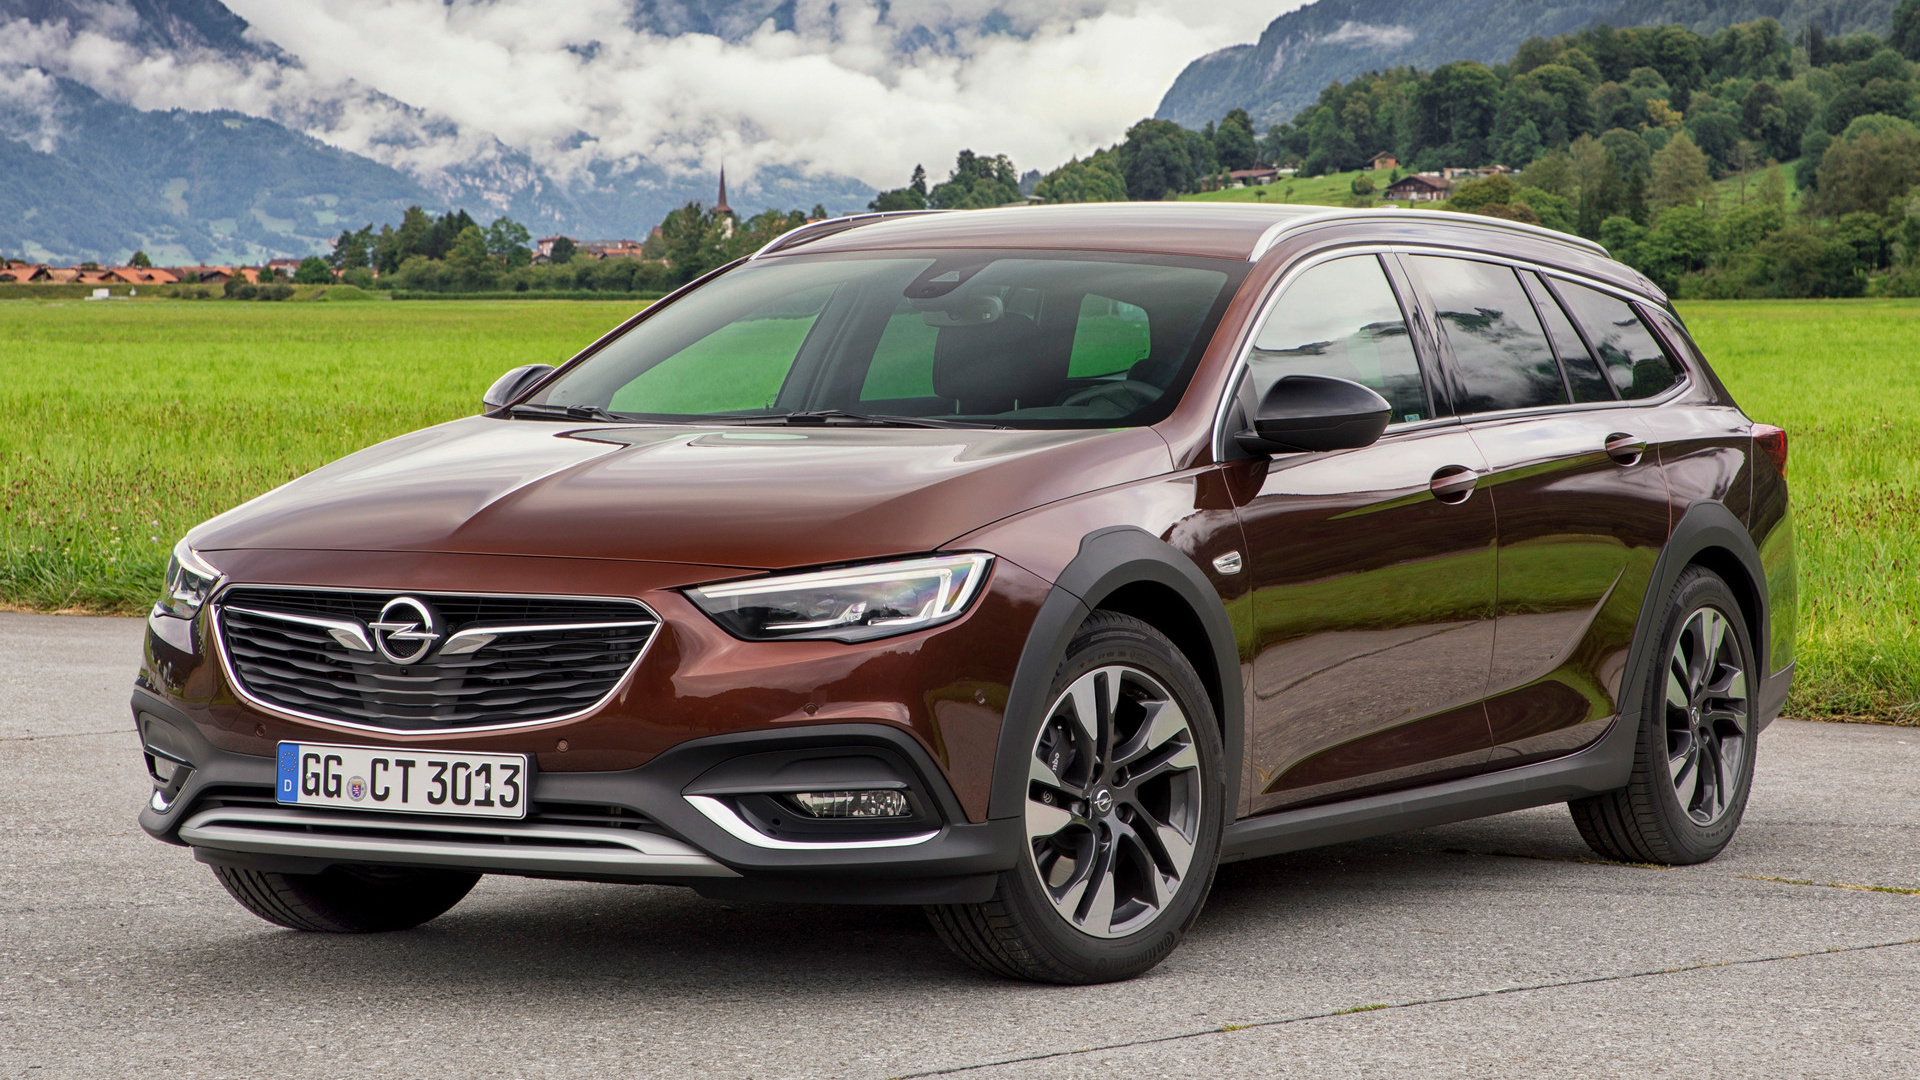 Opel Insignia, Auto enthusiast, Exclusive country tourer edition, HD wallpapers, 1920x1080 Full HD Desktop